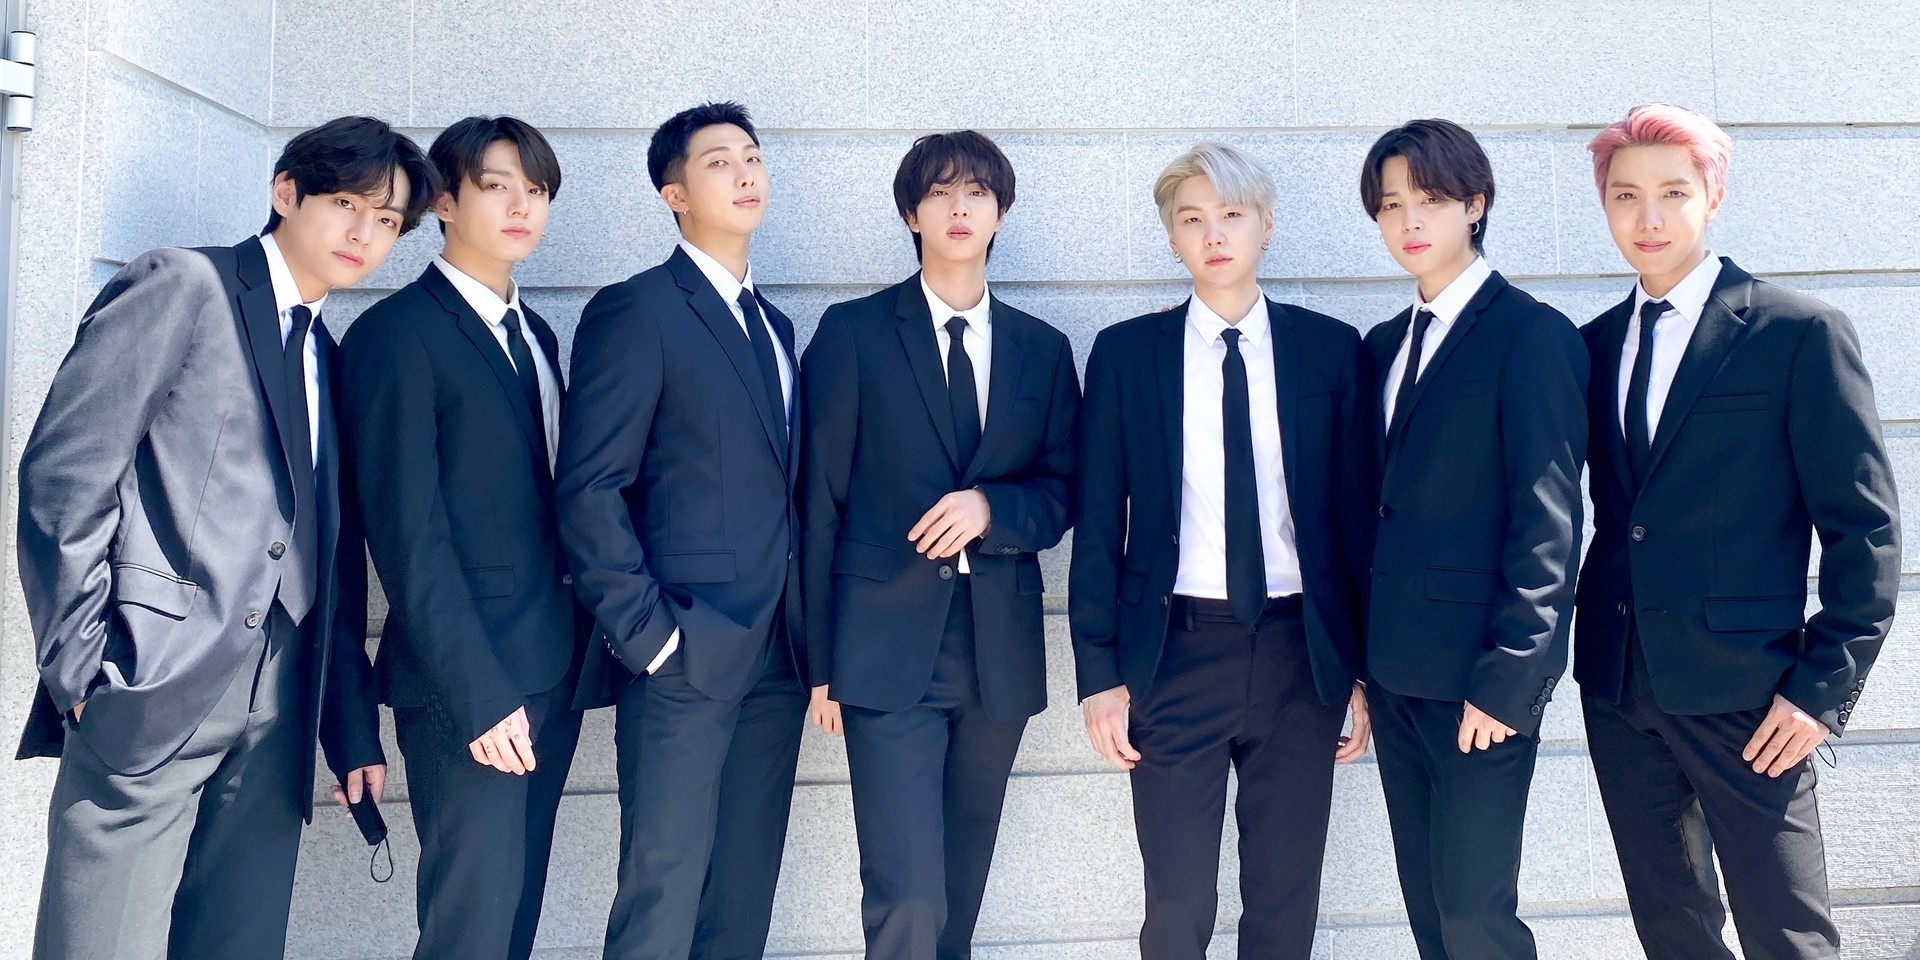 BTS confirmed to join President Biden at the White House to discuss Asian inclusion and representation, celebrate AANHPI Heritage Month